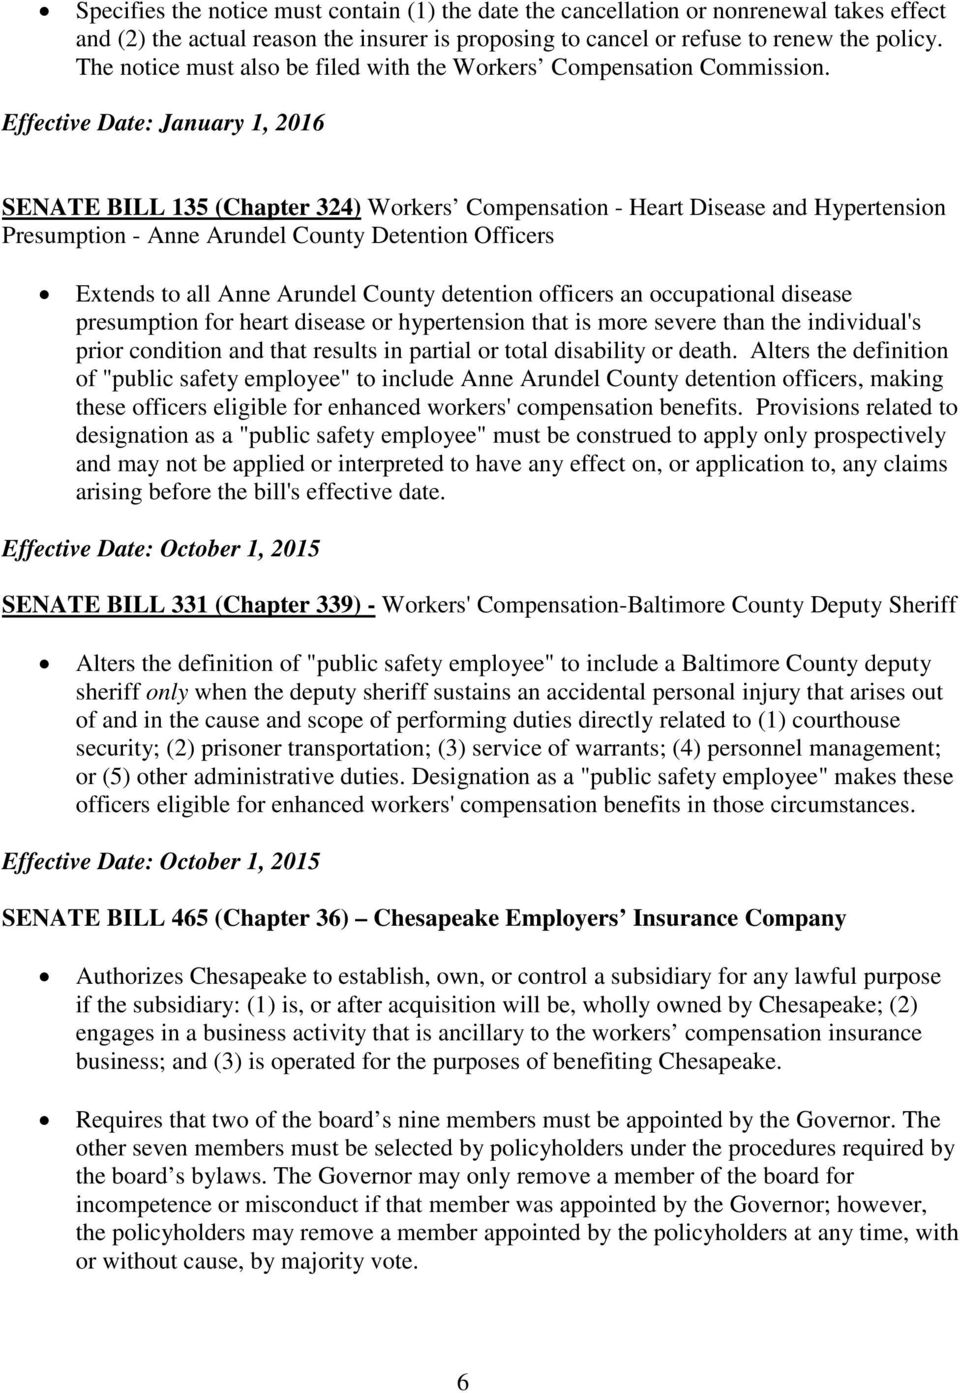 Effective Date: January 1, 2016 SENATE BILL 135 (Chapter 324) Workers Compensation - Heart Disease and Hypertension Presumption - Anne Arundel County Detention Officers Extends to all Anne Arundel